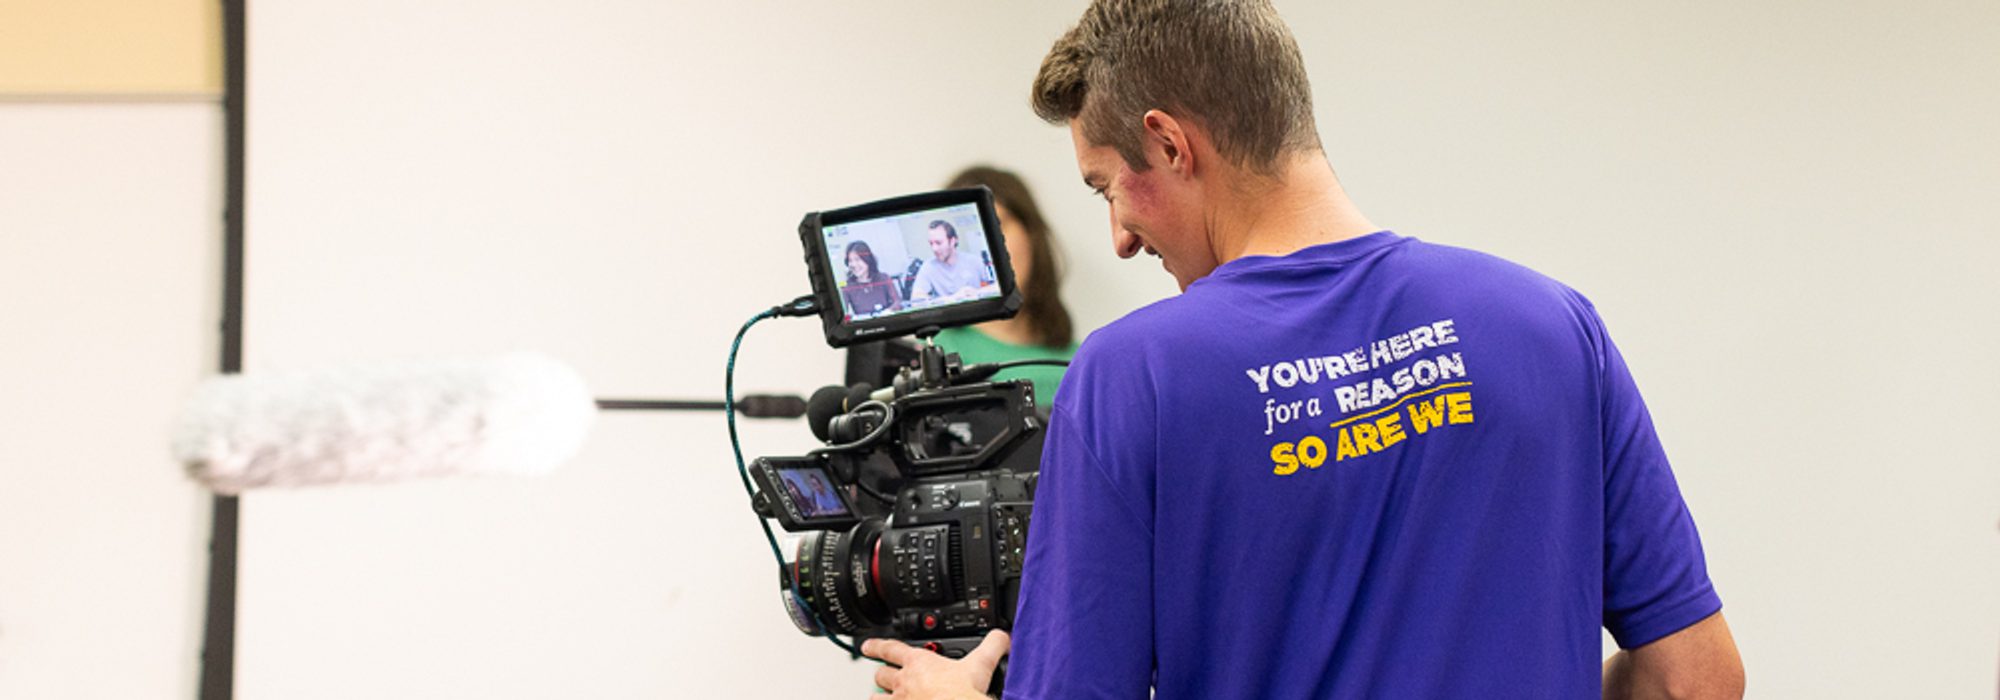 Film Studies student working with camera at UMHB.